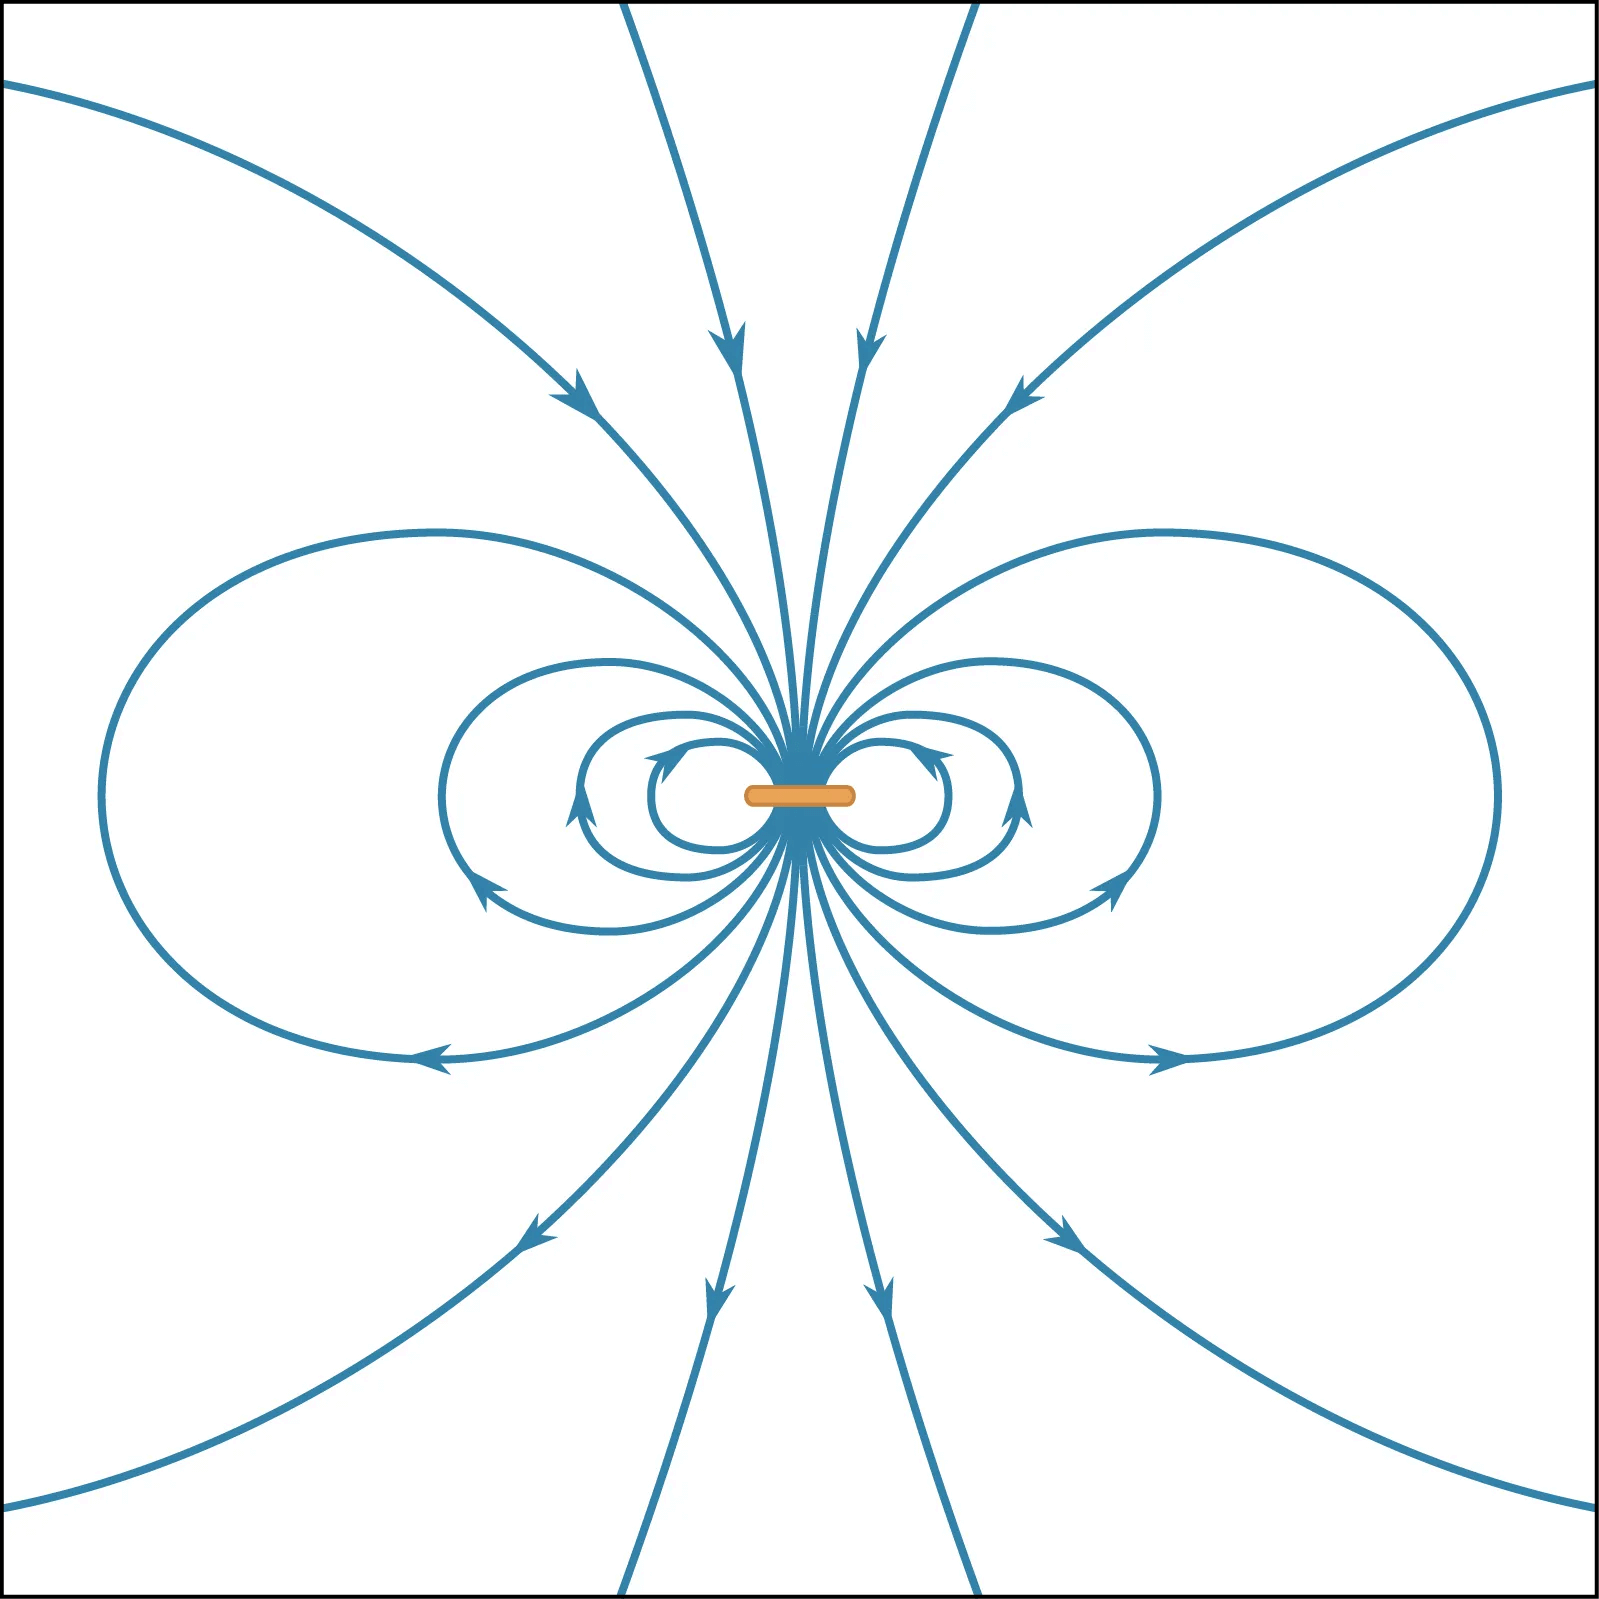  Magnetic Field Lines Of A Bar Magnet